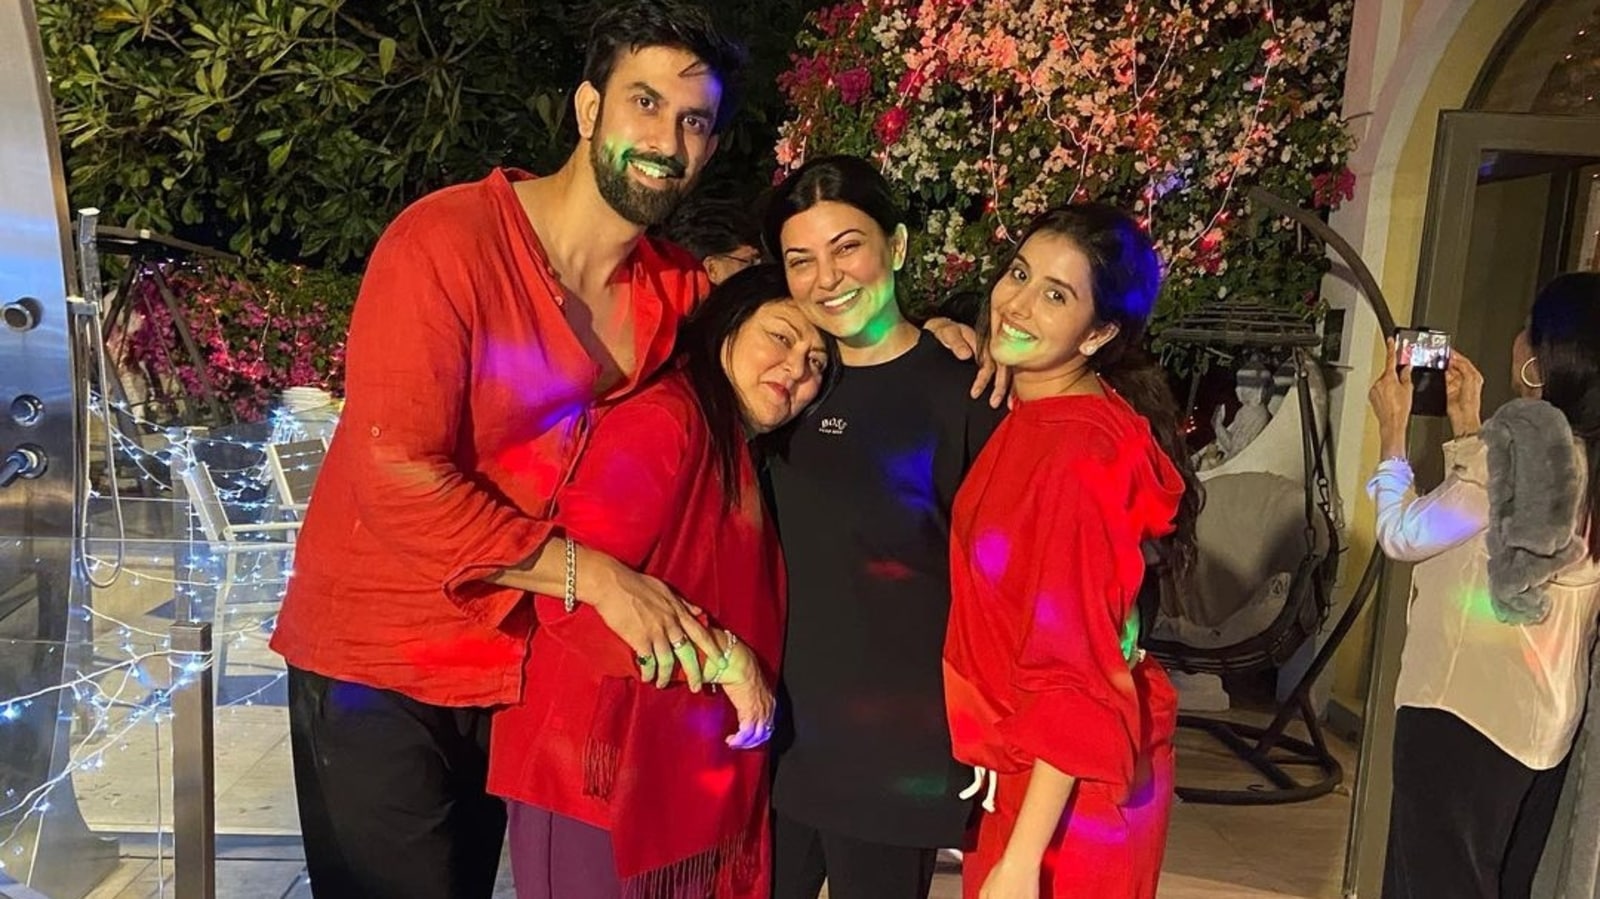 Charu Asopa alleges Rajeev Sen cheated on her when she was pregnant, says she fell for his excuses: ‘Entire family knew’